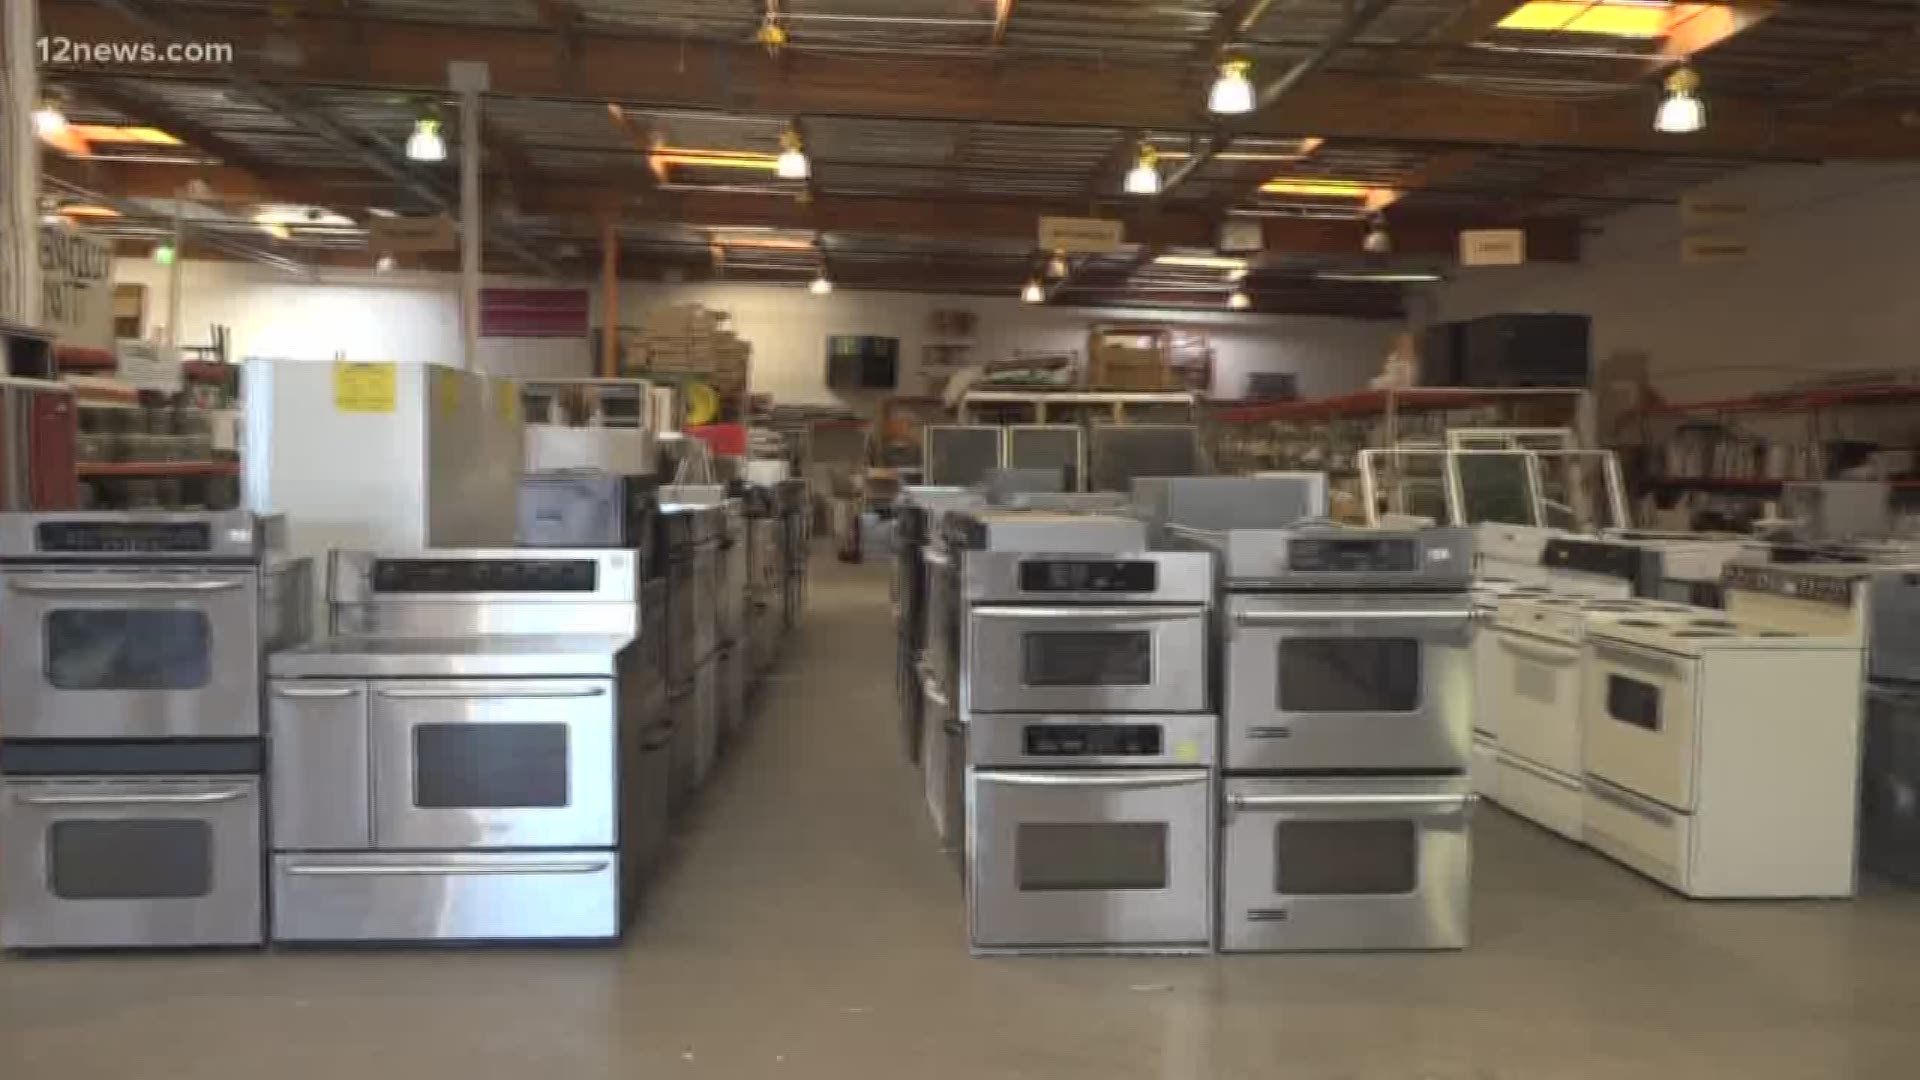 A Valley nonprofit is making it possible to save some serious cash and recycle most of your unwanted housing items at the same time.